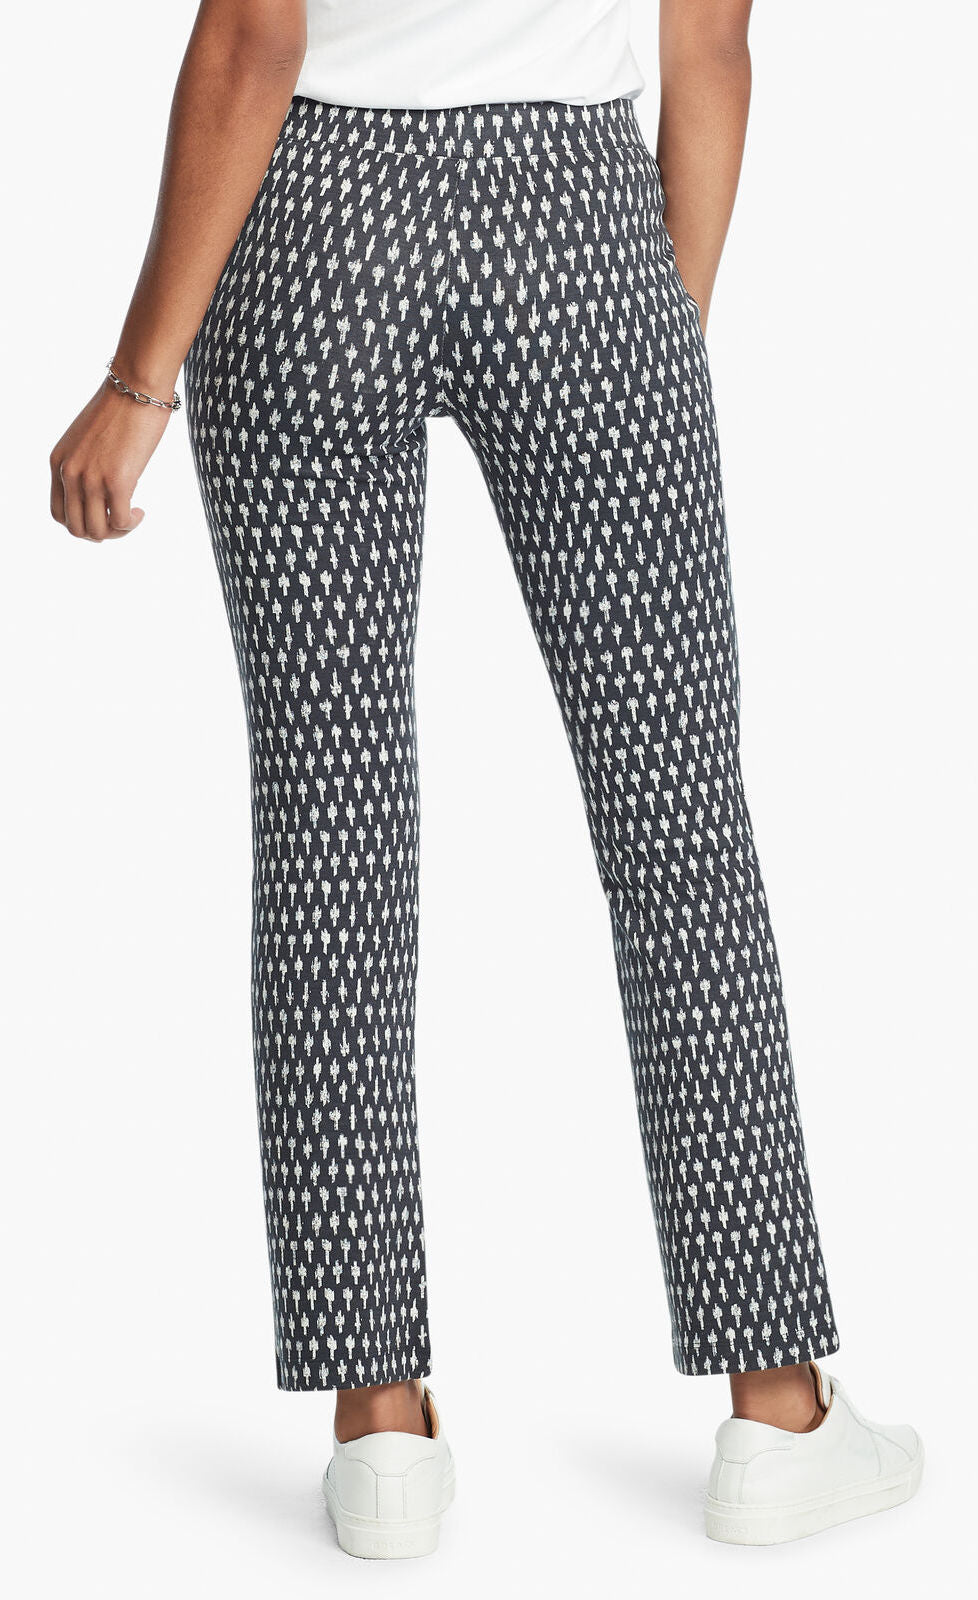 Back, bottom half view of a woman wearing the Nic + Zoe Ponte Ikat Pant. These pants are indigo with white speckled print. They have a straight leg and sit above the ankles.